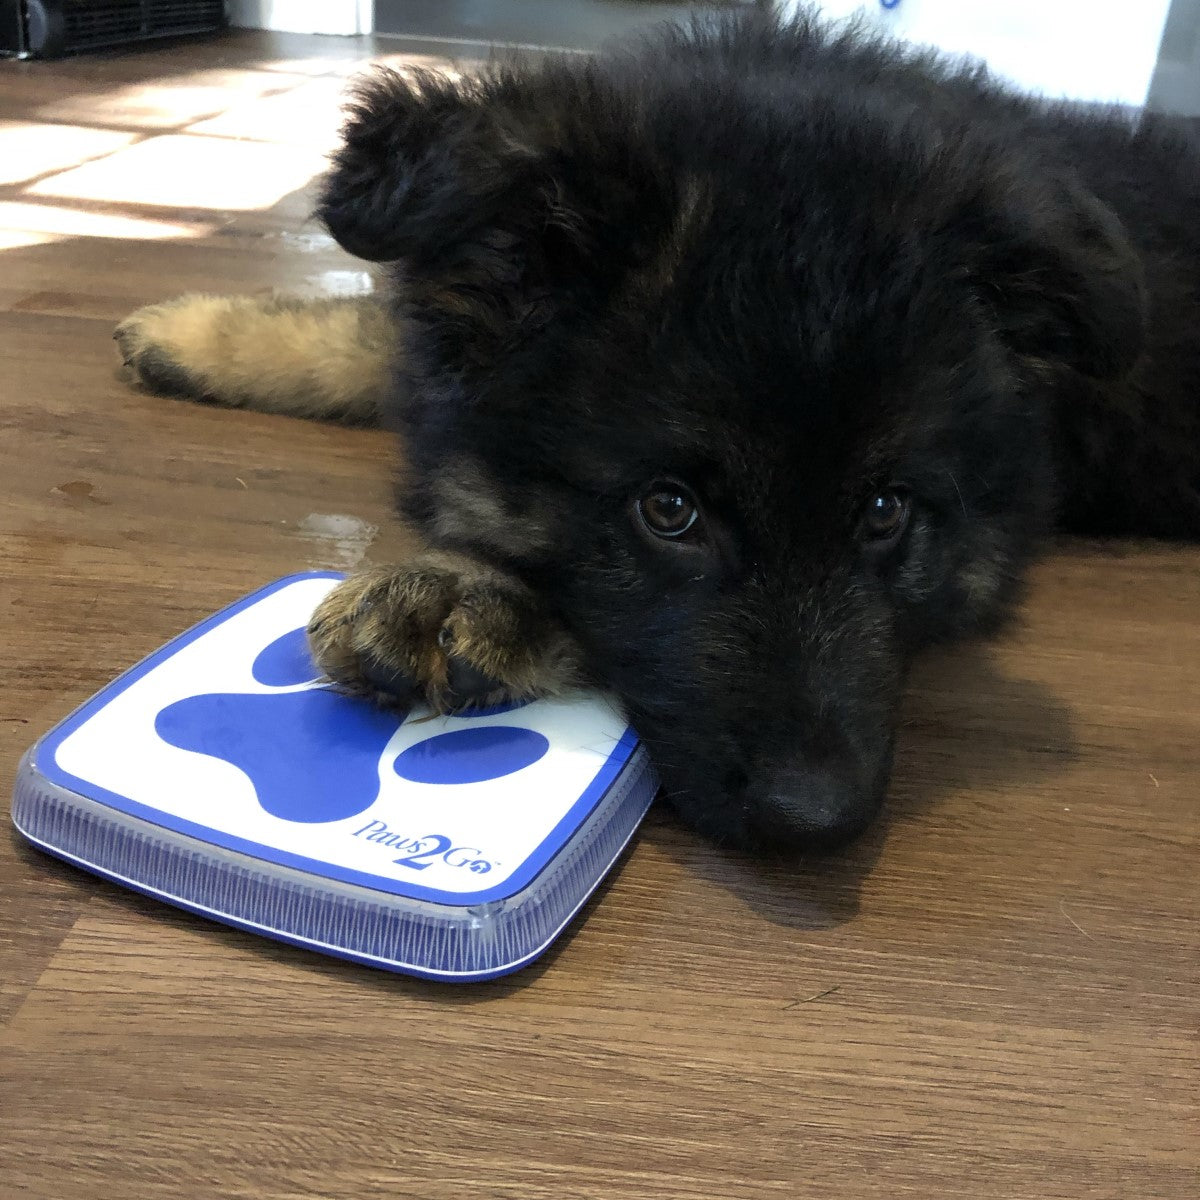 Dog laying next to Paws2Go wireless dog doorbell